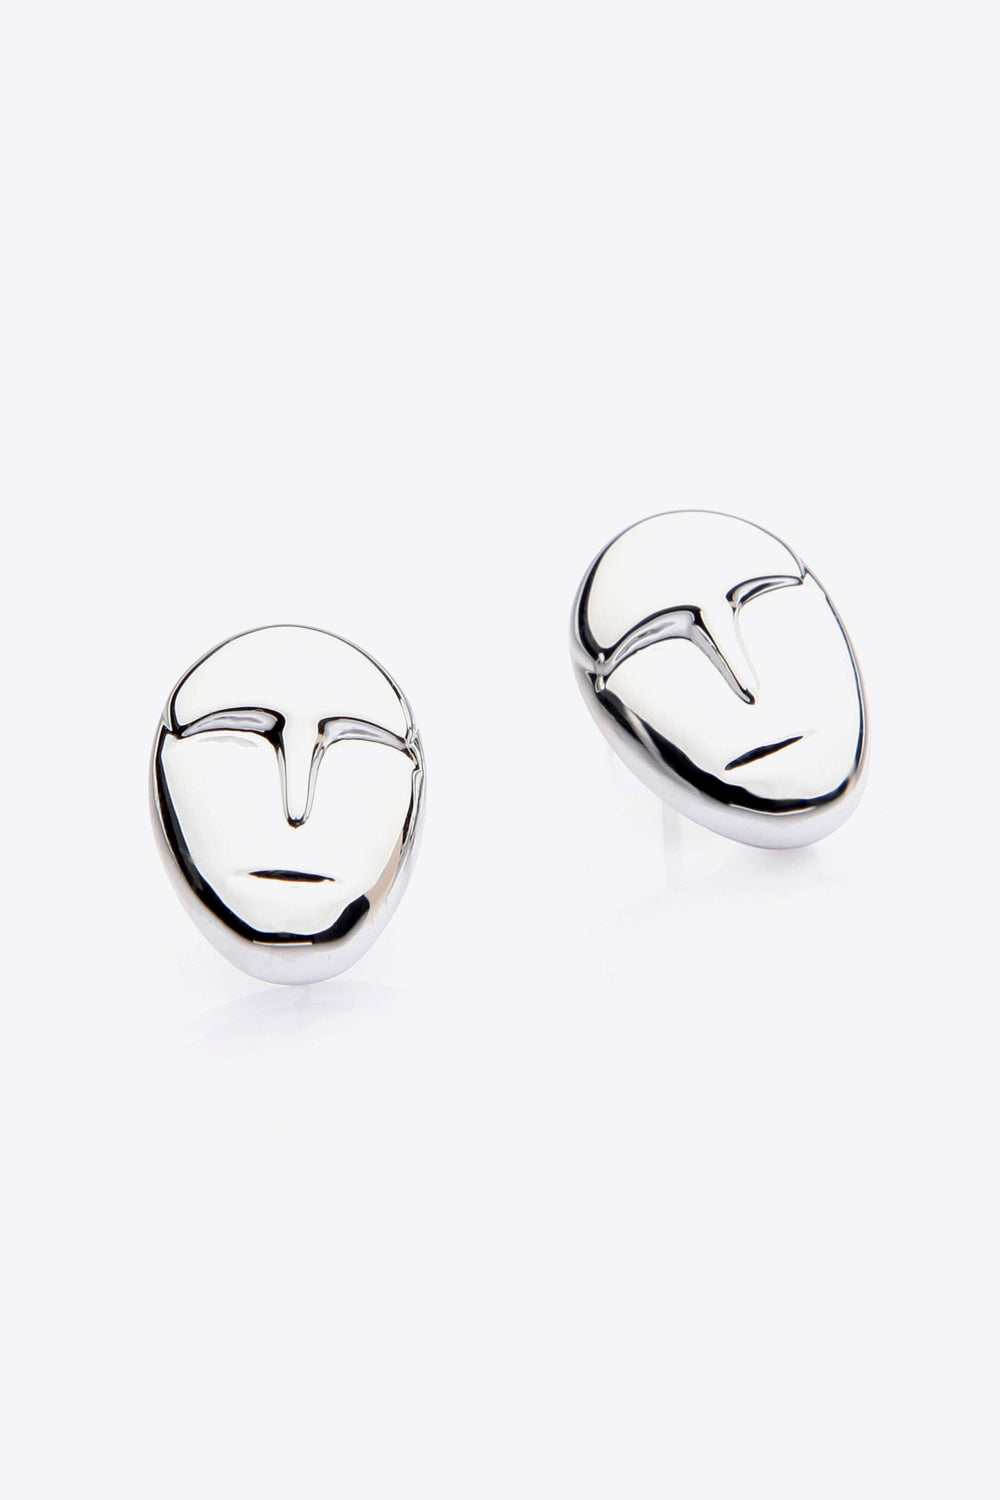 Abstract Face Figure Stud Earrings